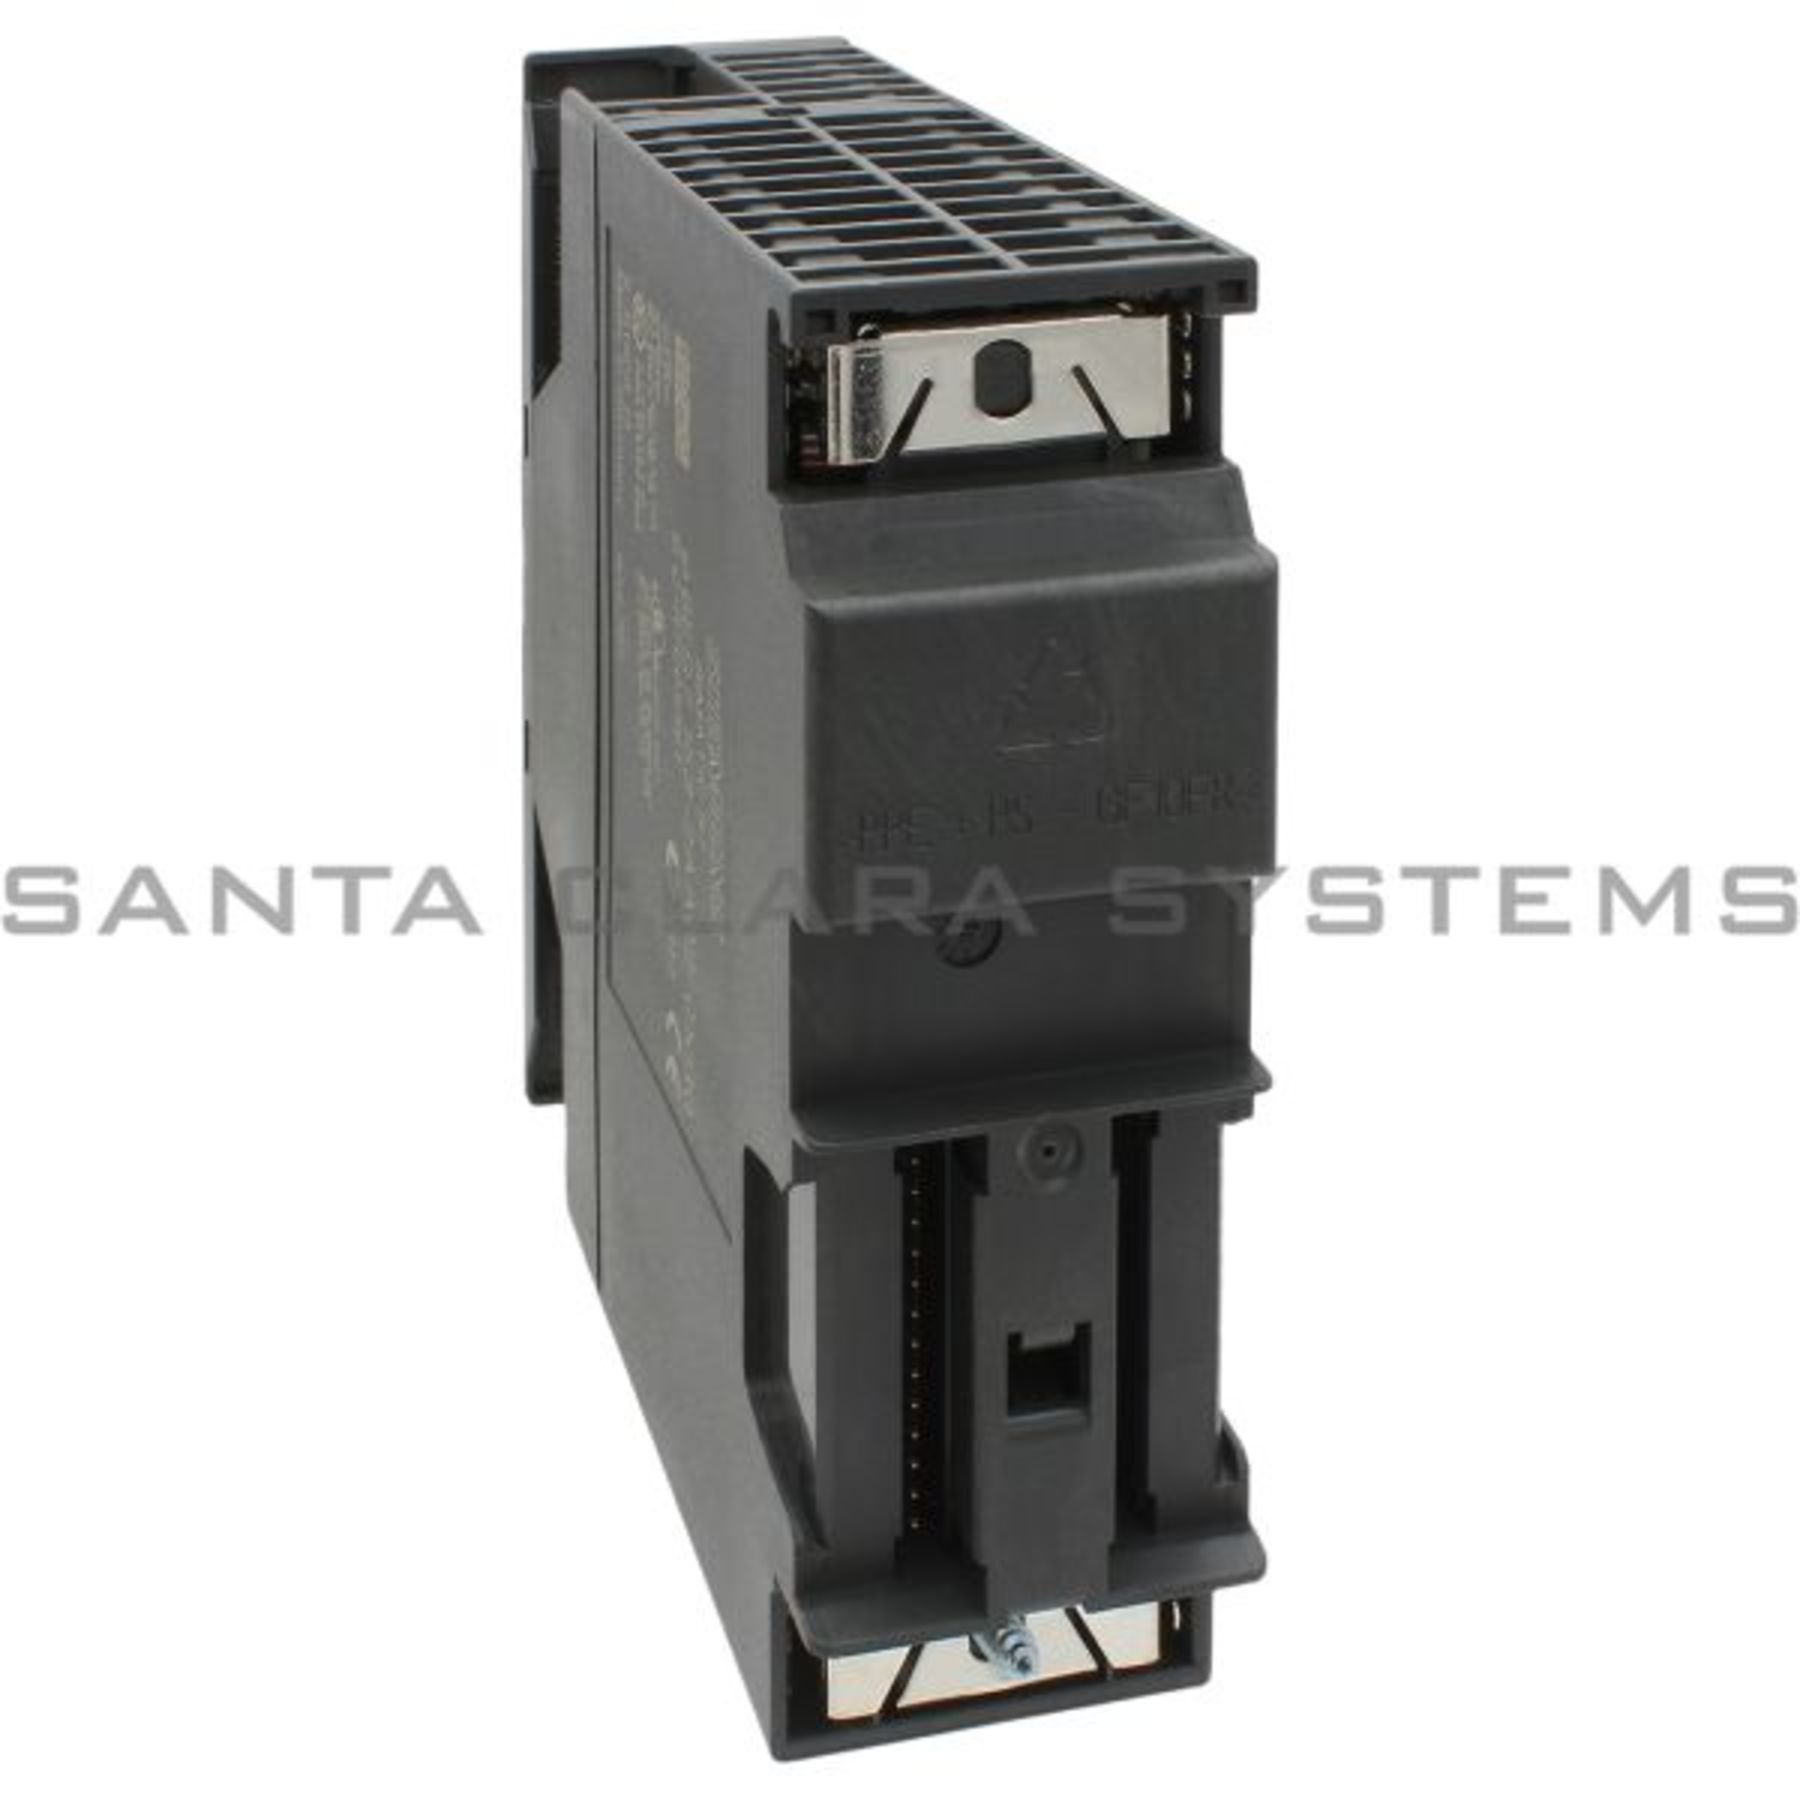 6ES7153-2AA02-0XB0 Siemens In stock and ready to ship - Santa